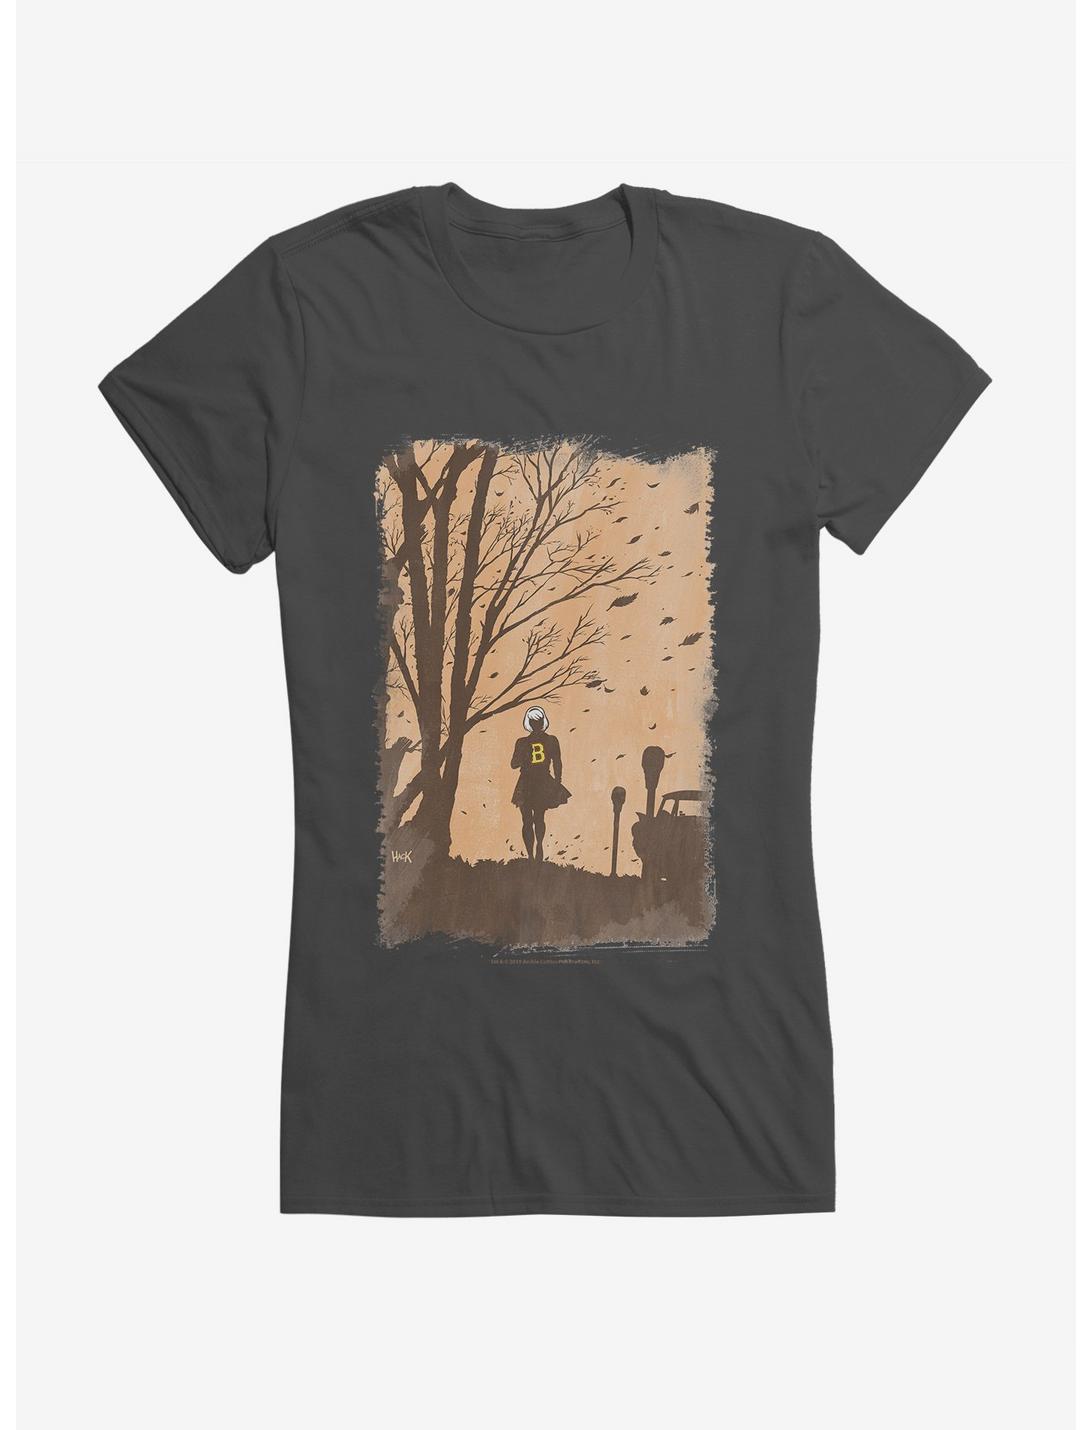 Chilling Adventures Of Sabrina Windy Girls Charcoal T-Shirt, CHARCOAL, hi-res